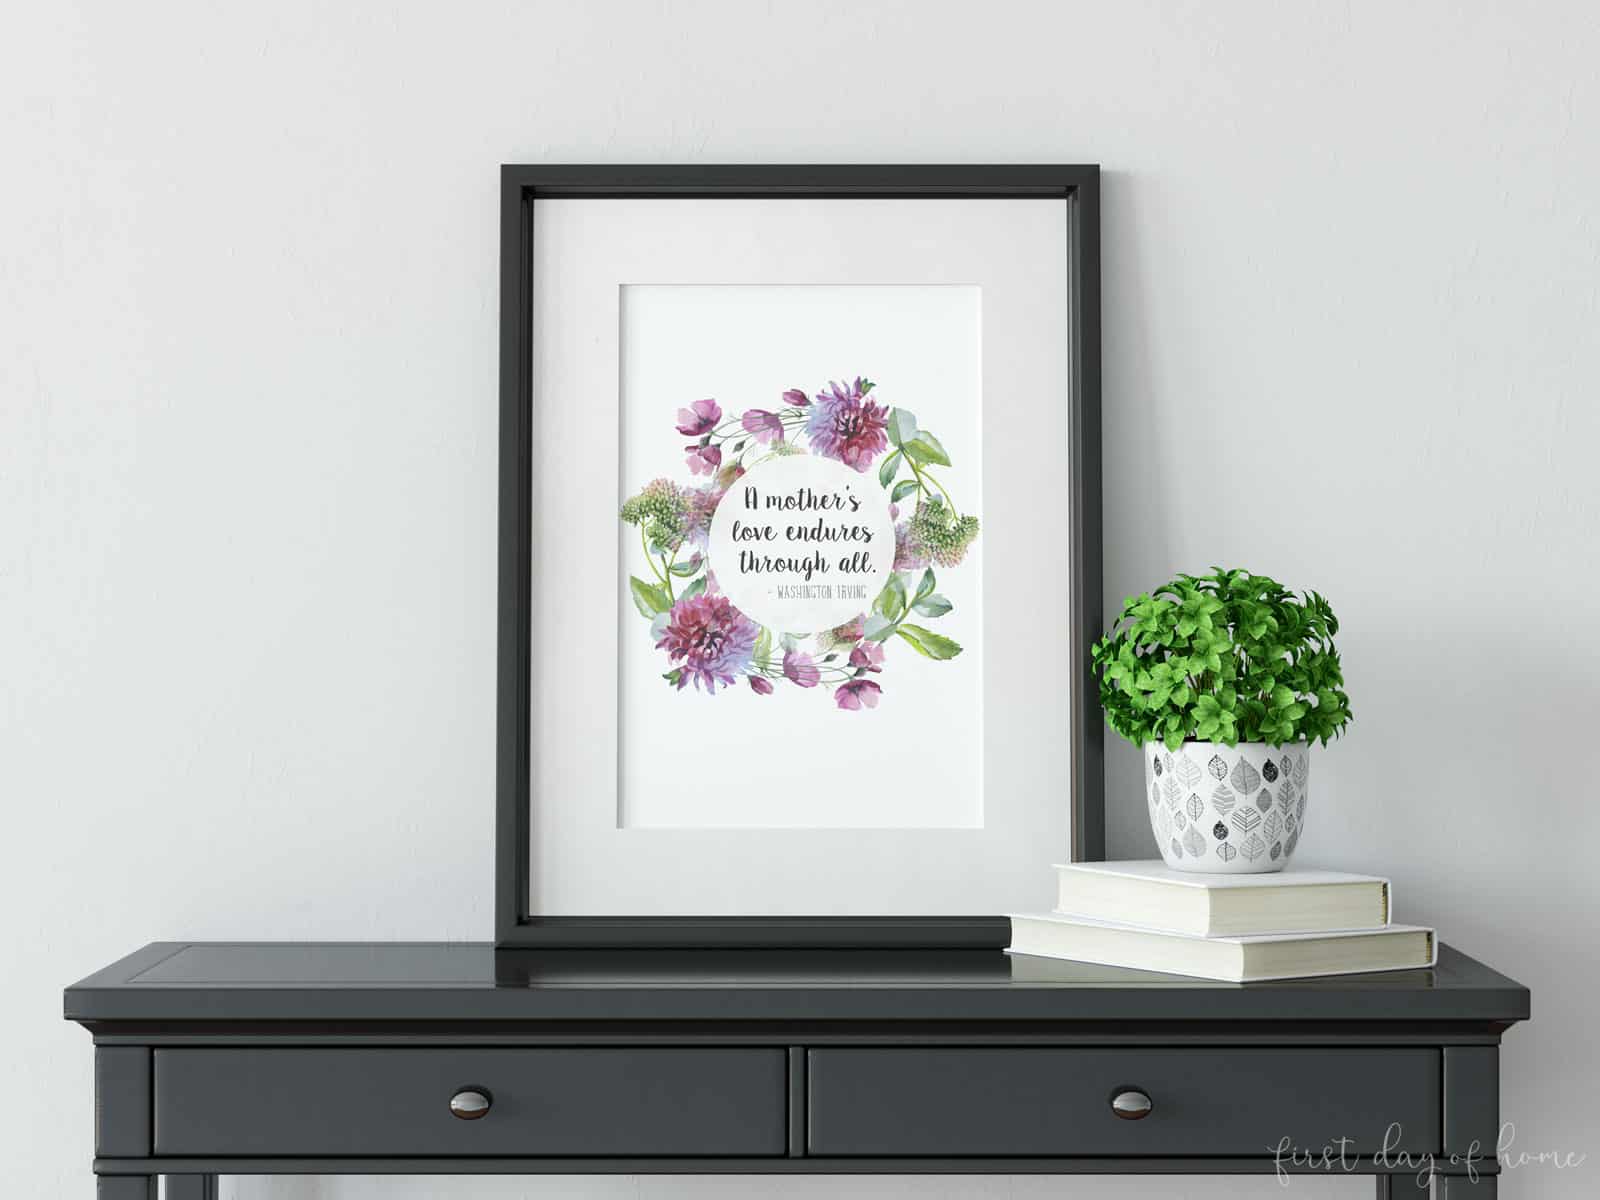 Mother's Day free printable with quote: A Mother's Love Endures through All